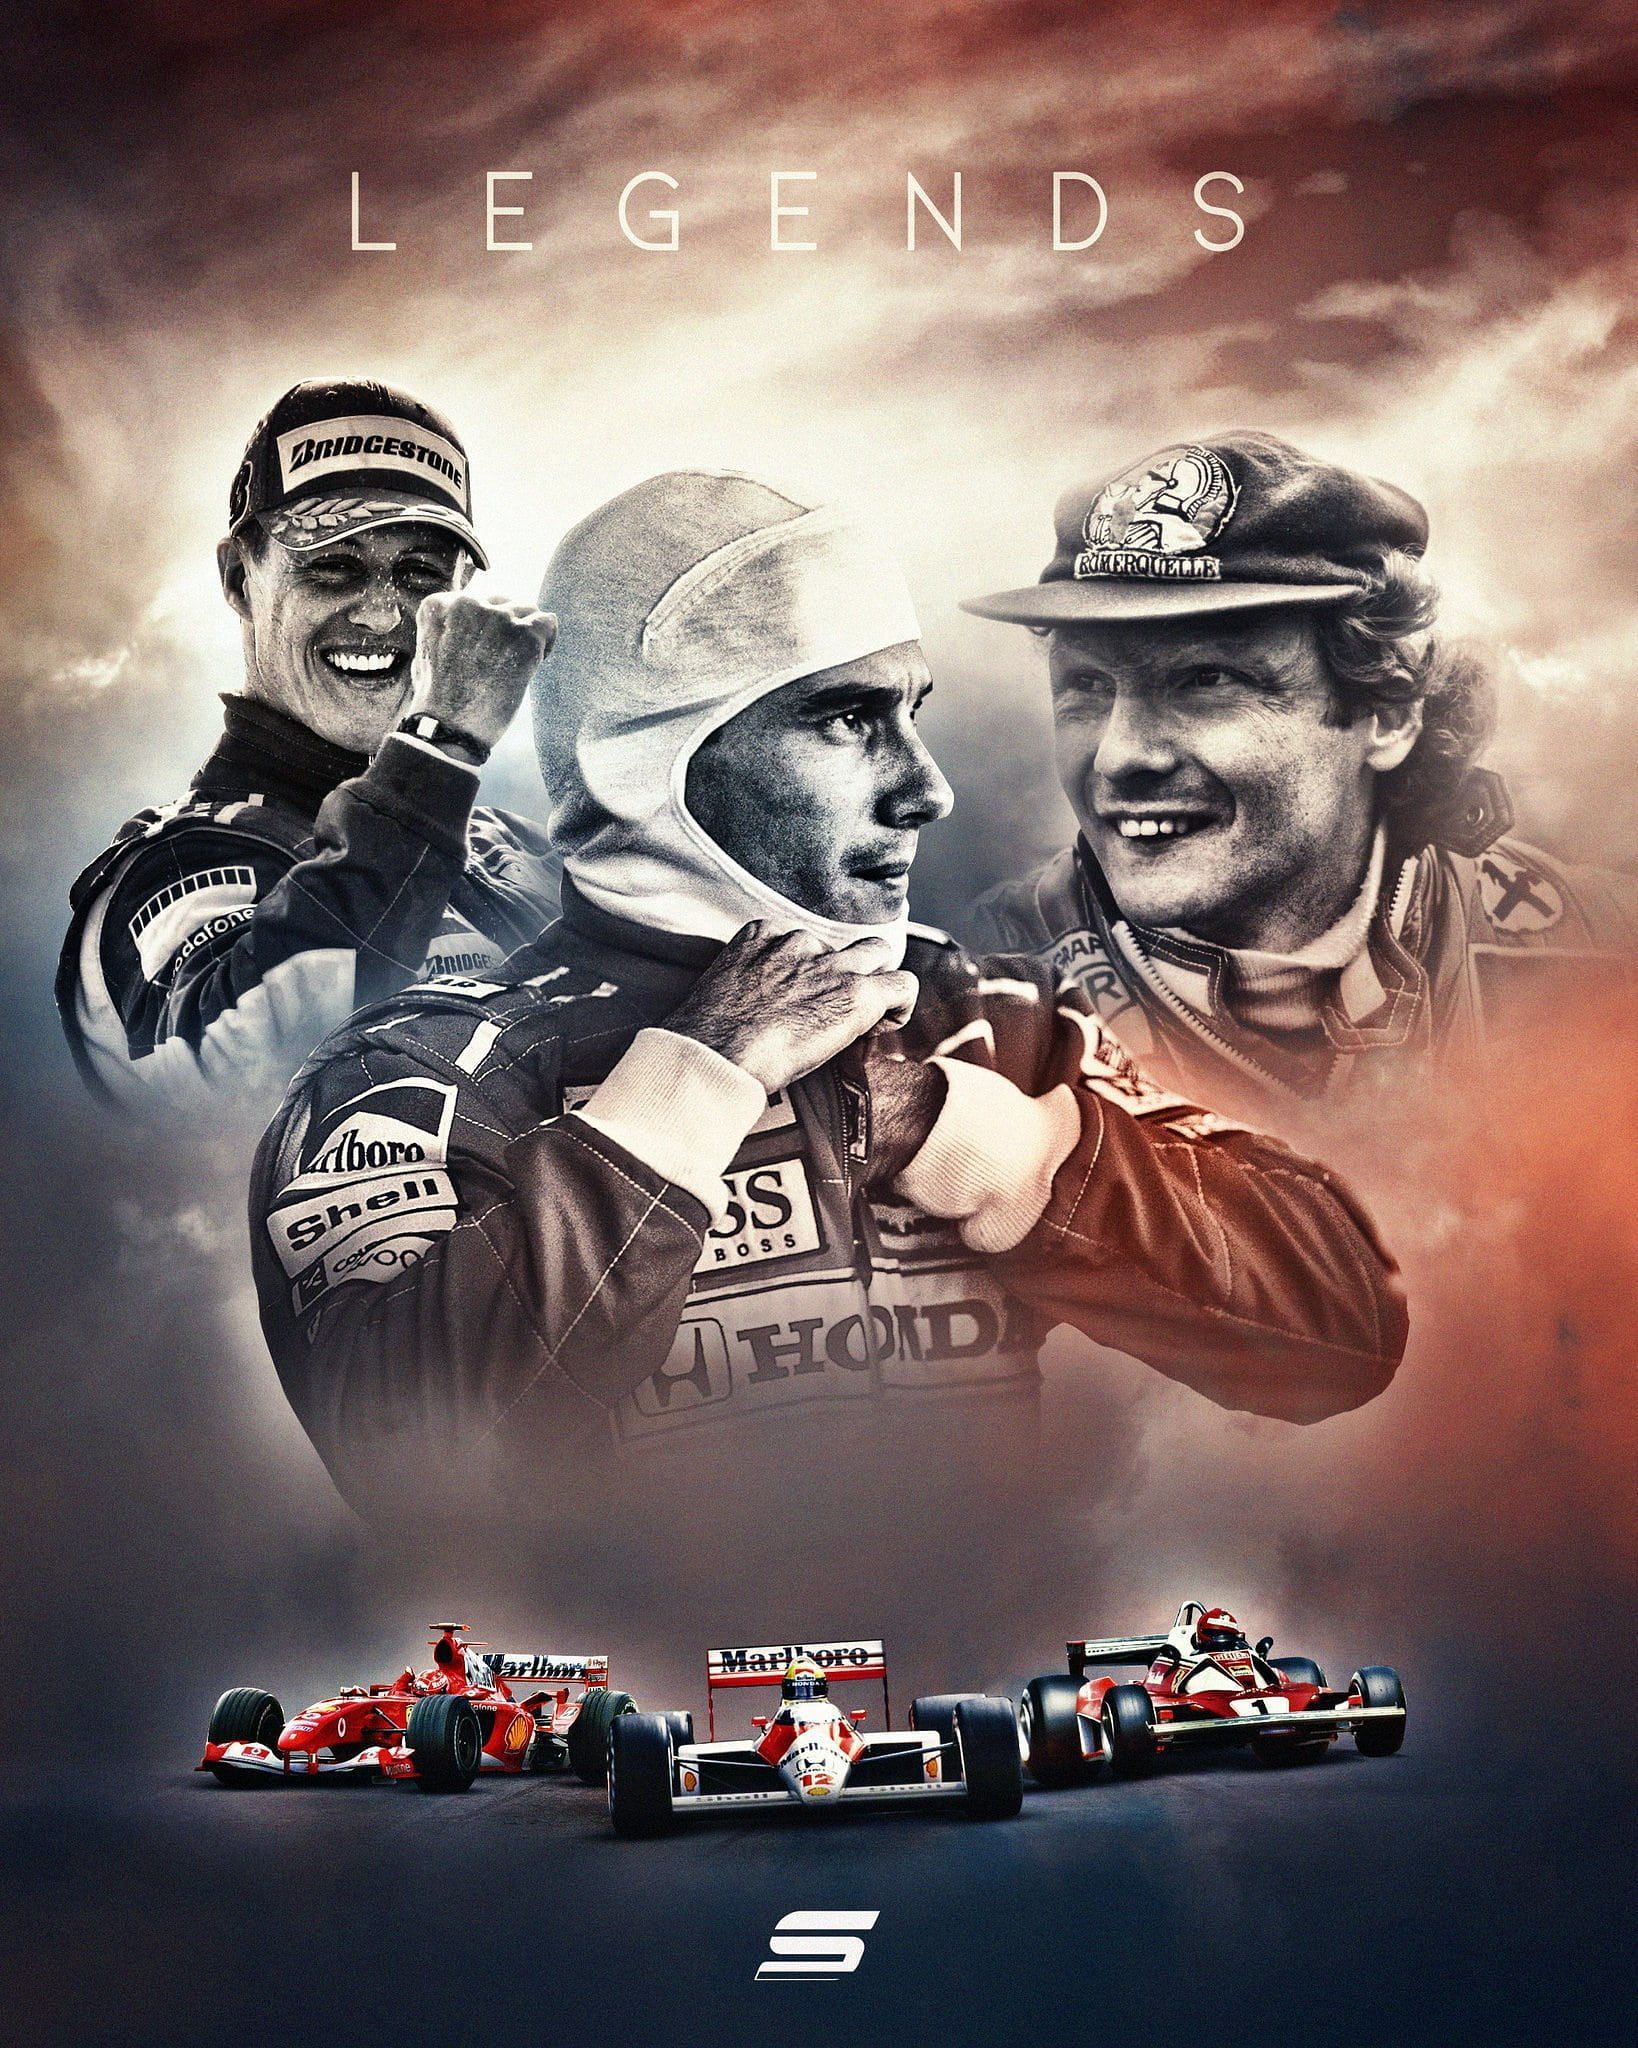 Image of some of the F1 greats